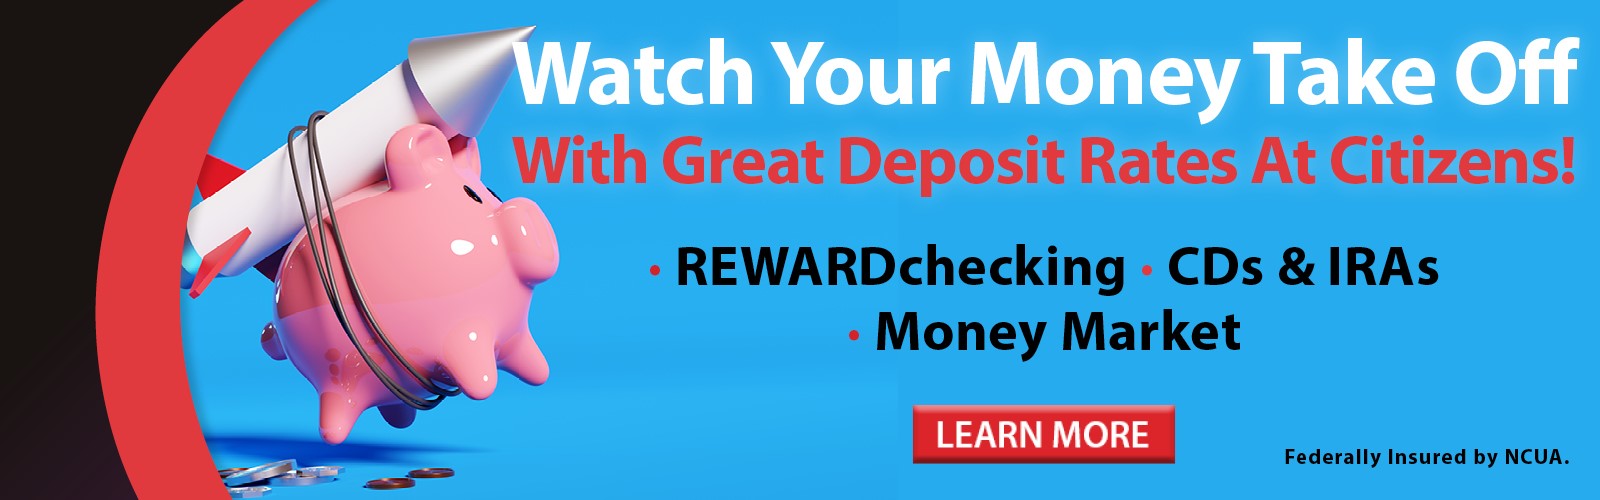 Watch Your Money Take Off With Great Deposit Rates At Citizens! Click here for more information.